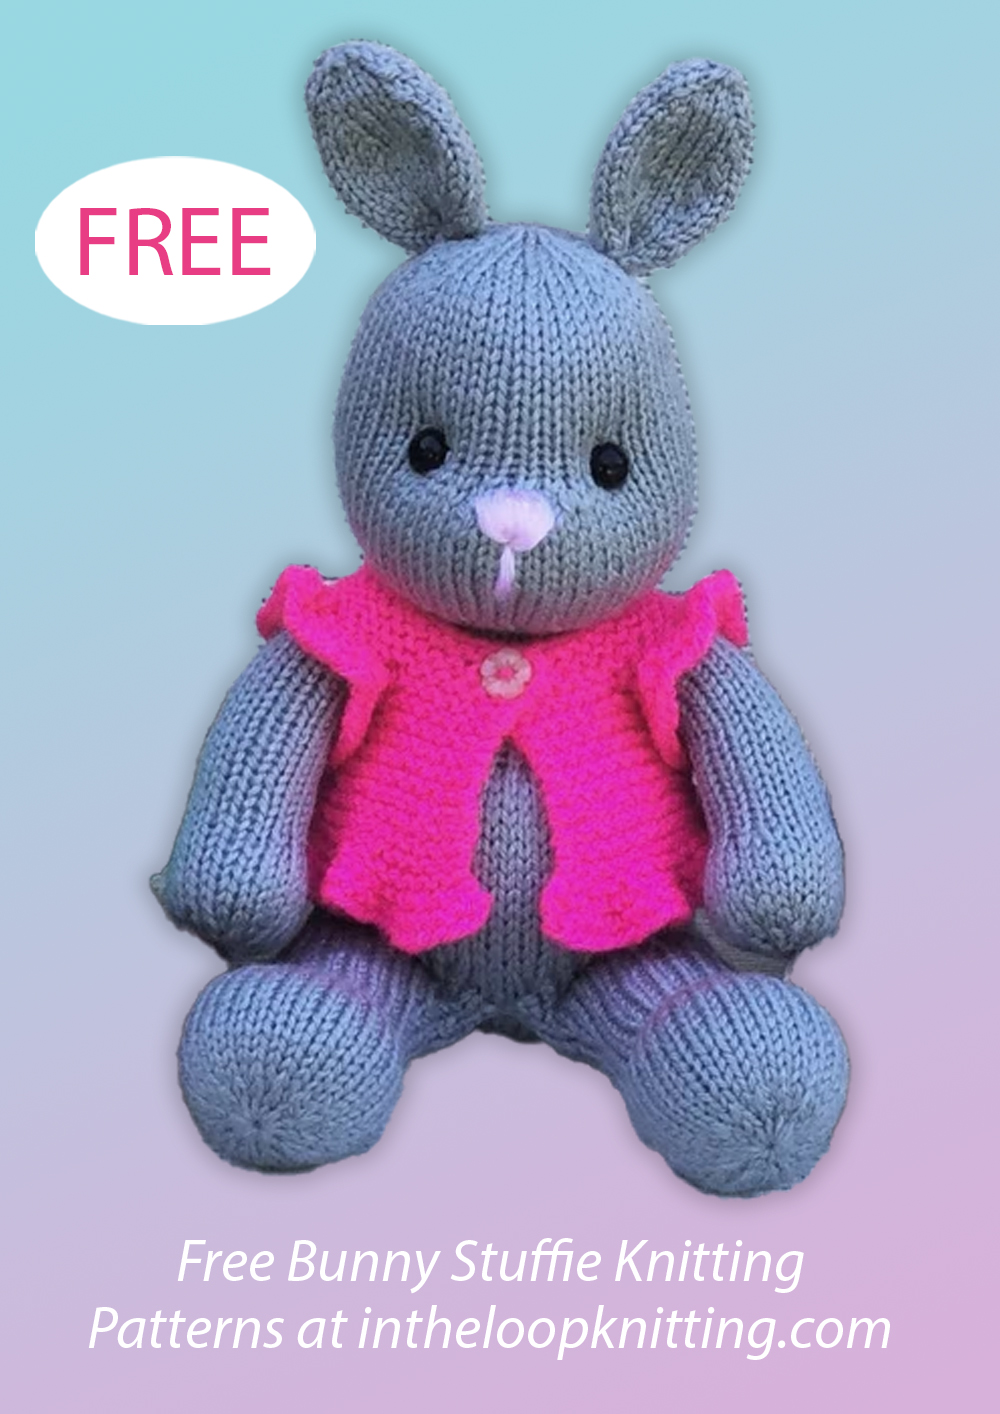 Animal Toy Knitting Pattern Cuddly Critters Bear, Bunny, Puppy